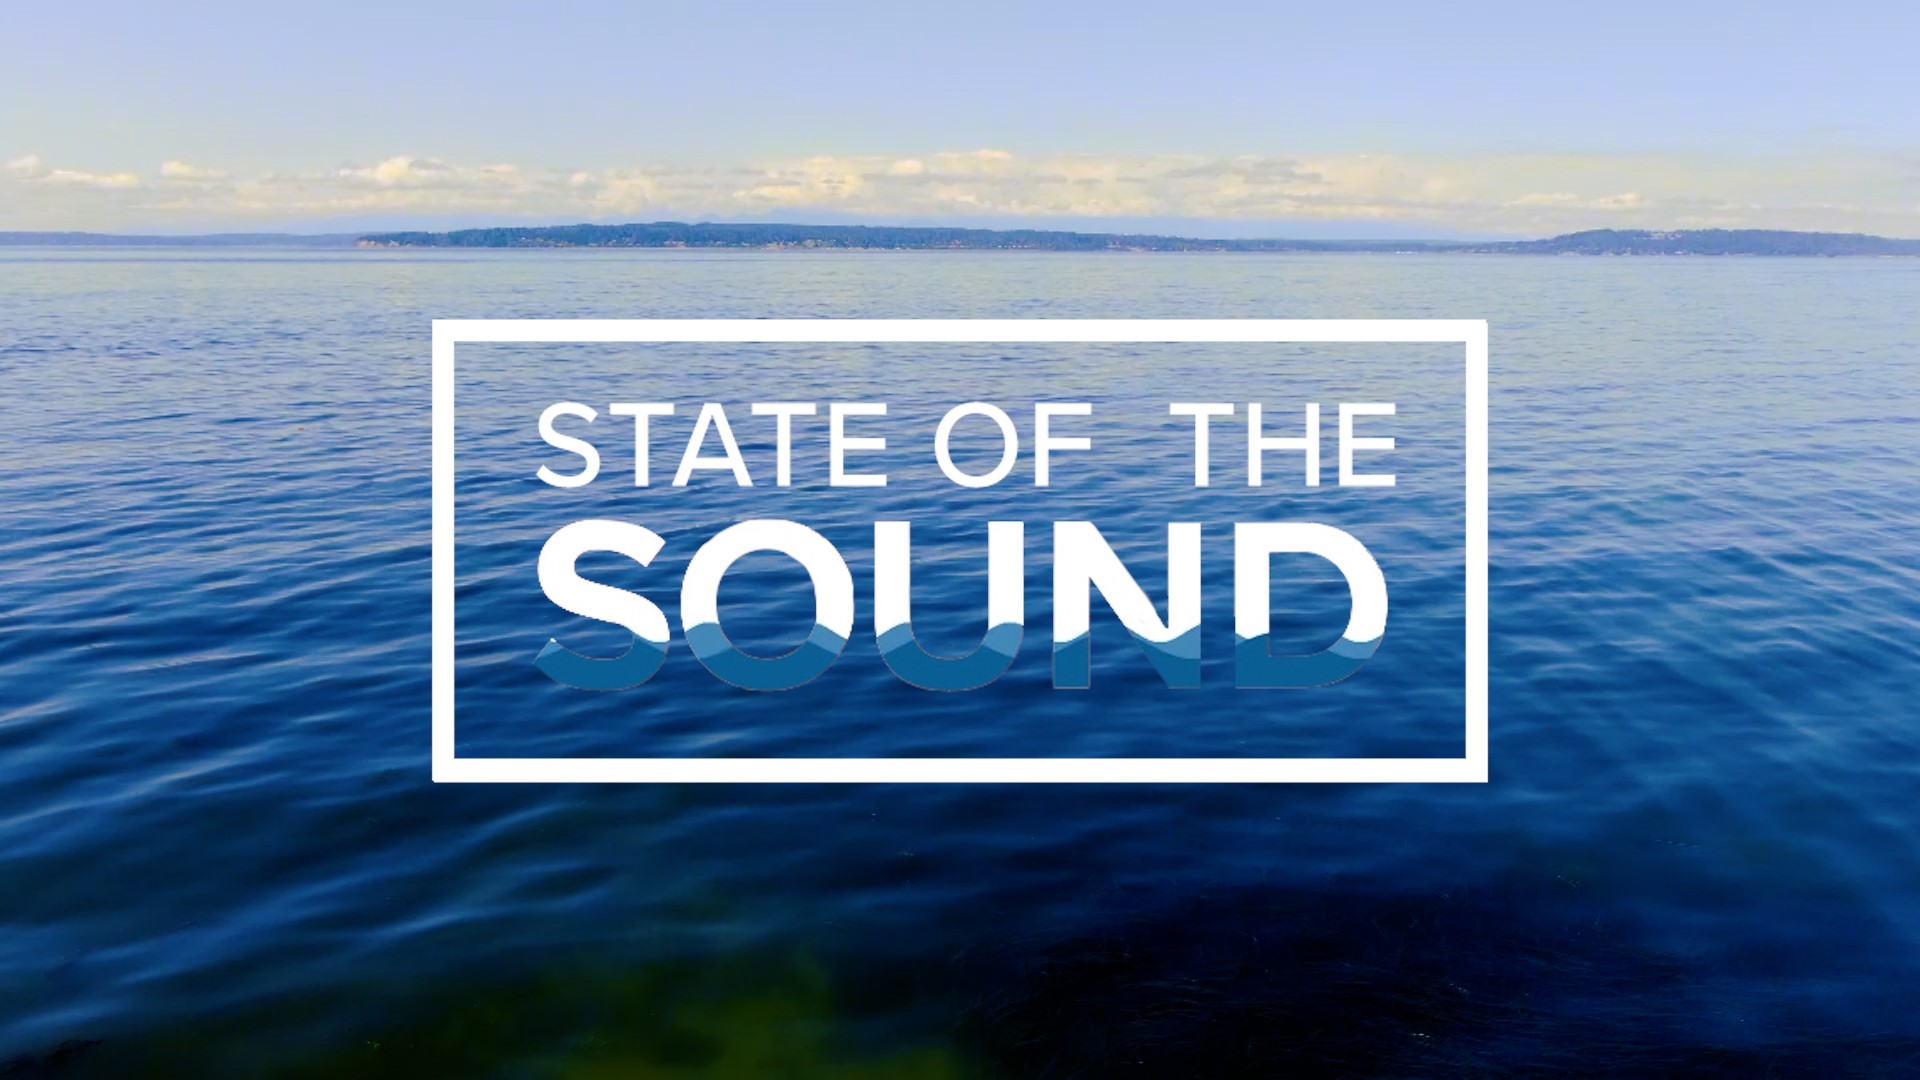 A look at the work being done to protect the ecosystem of Puget Sound, the nation's second largest marine estuary.